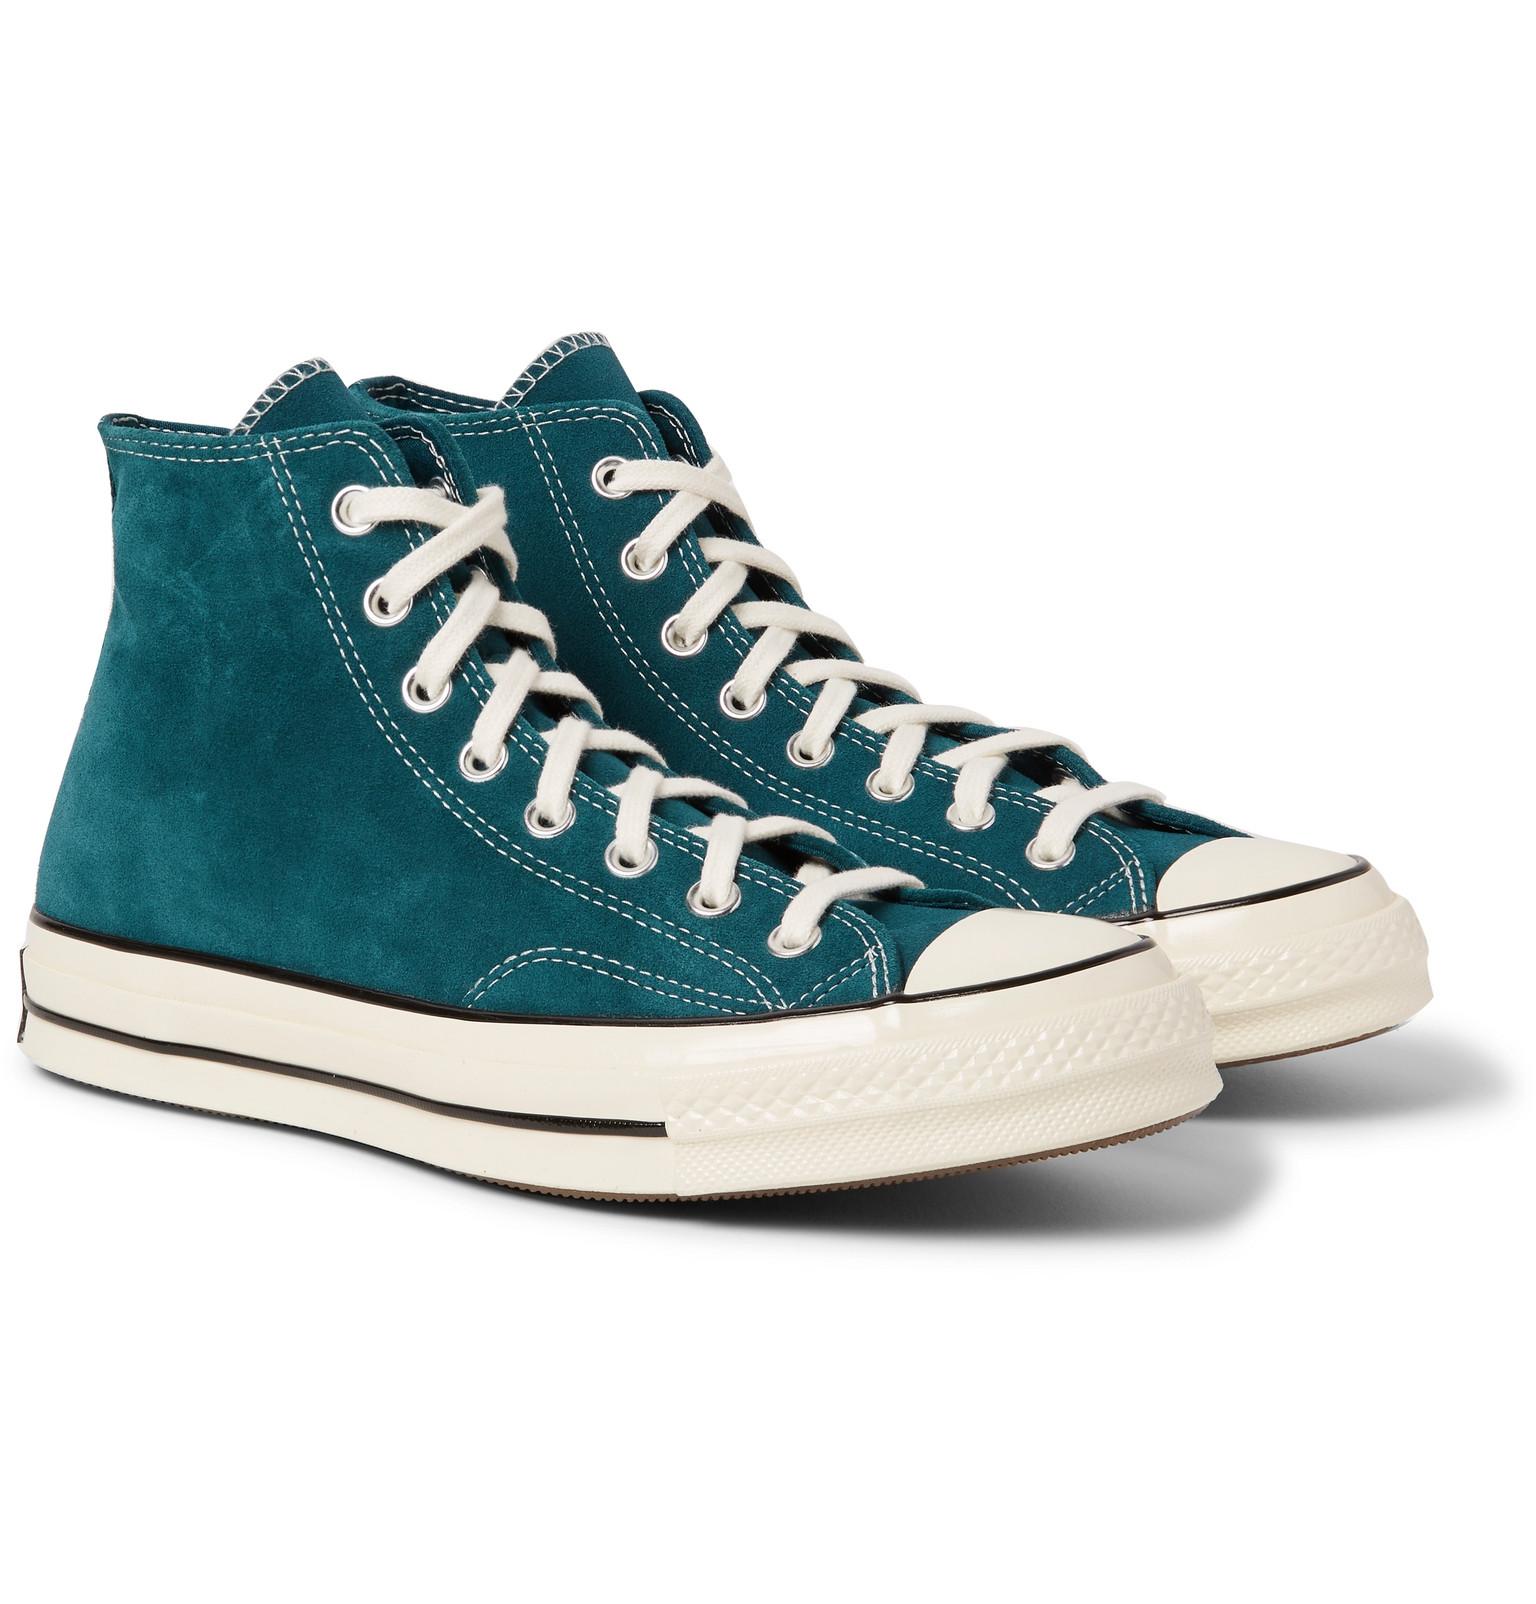 Converse Chuck 70 Suede High-top Sneakers in Blue for Men - Lyst